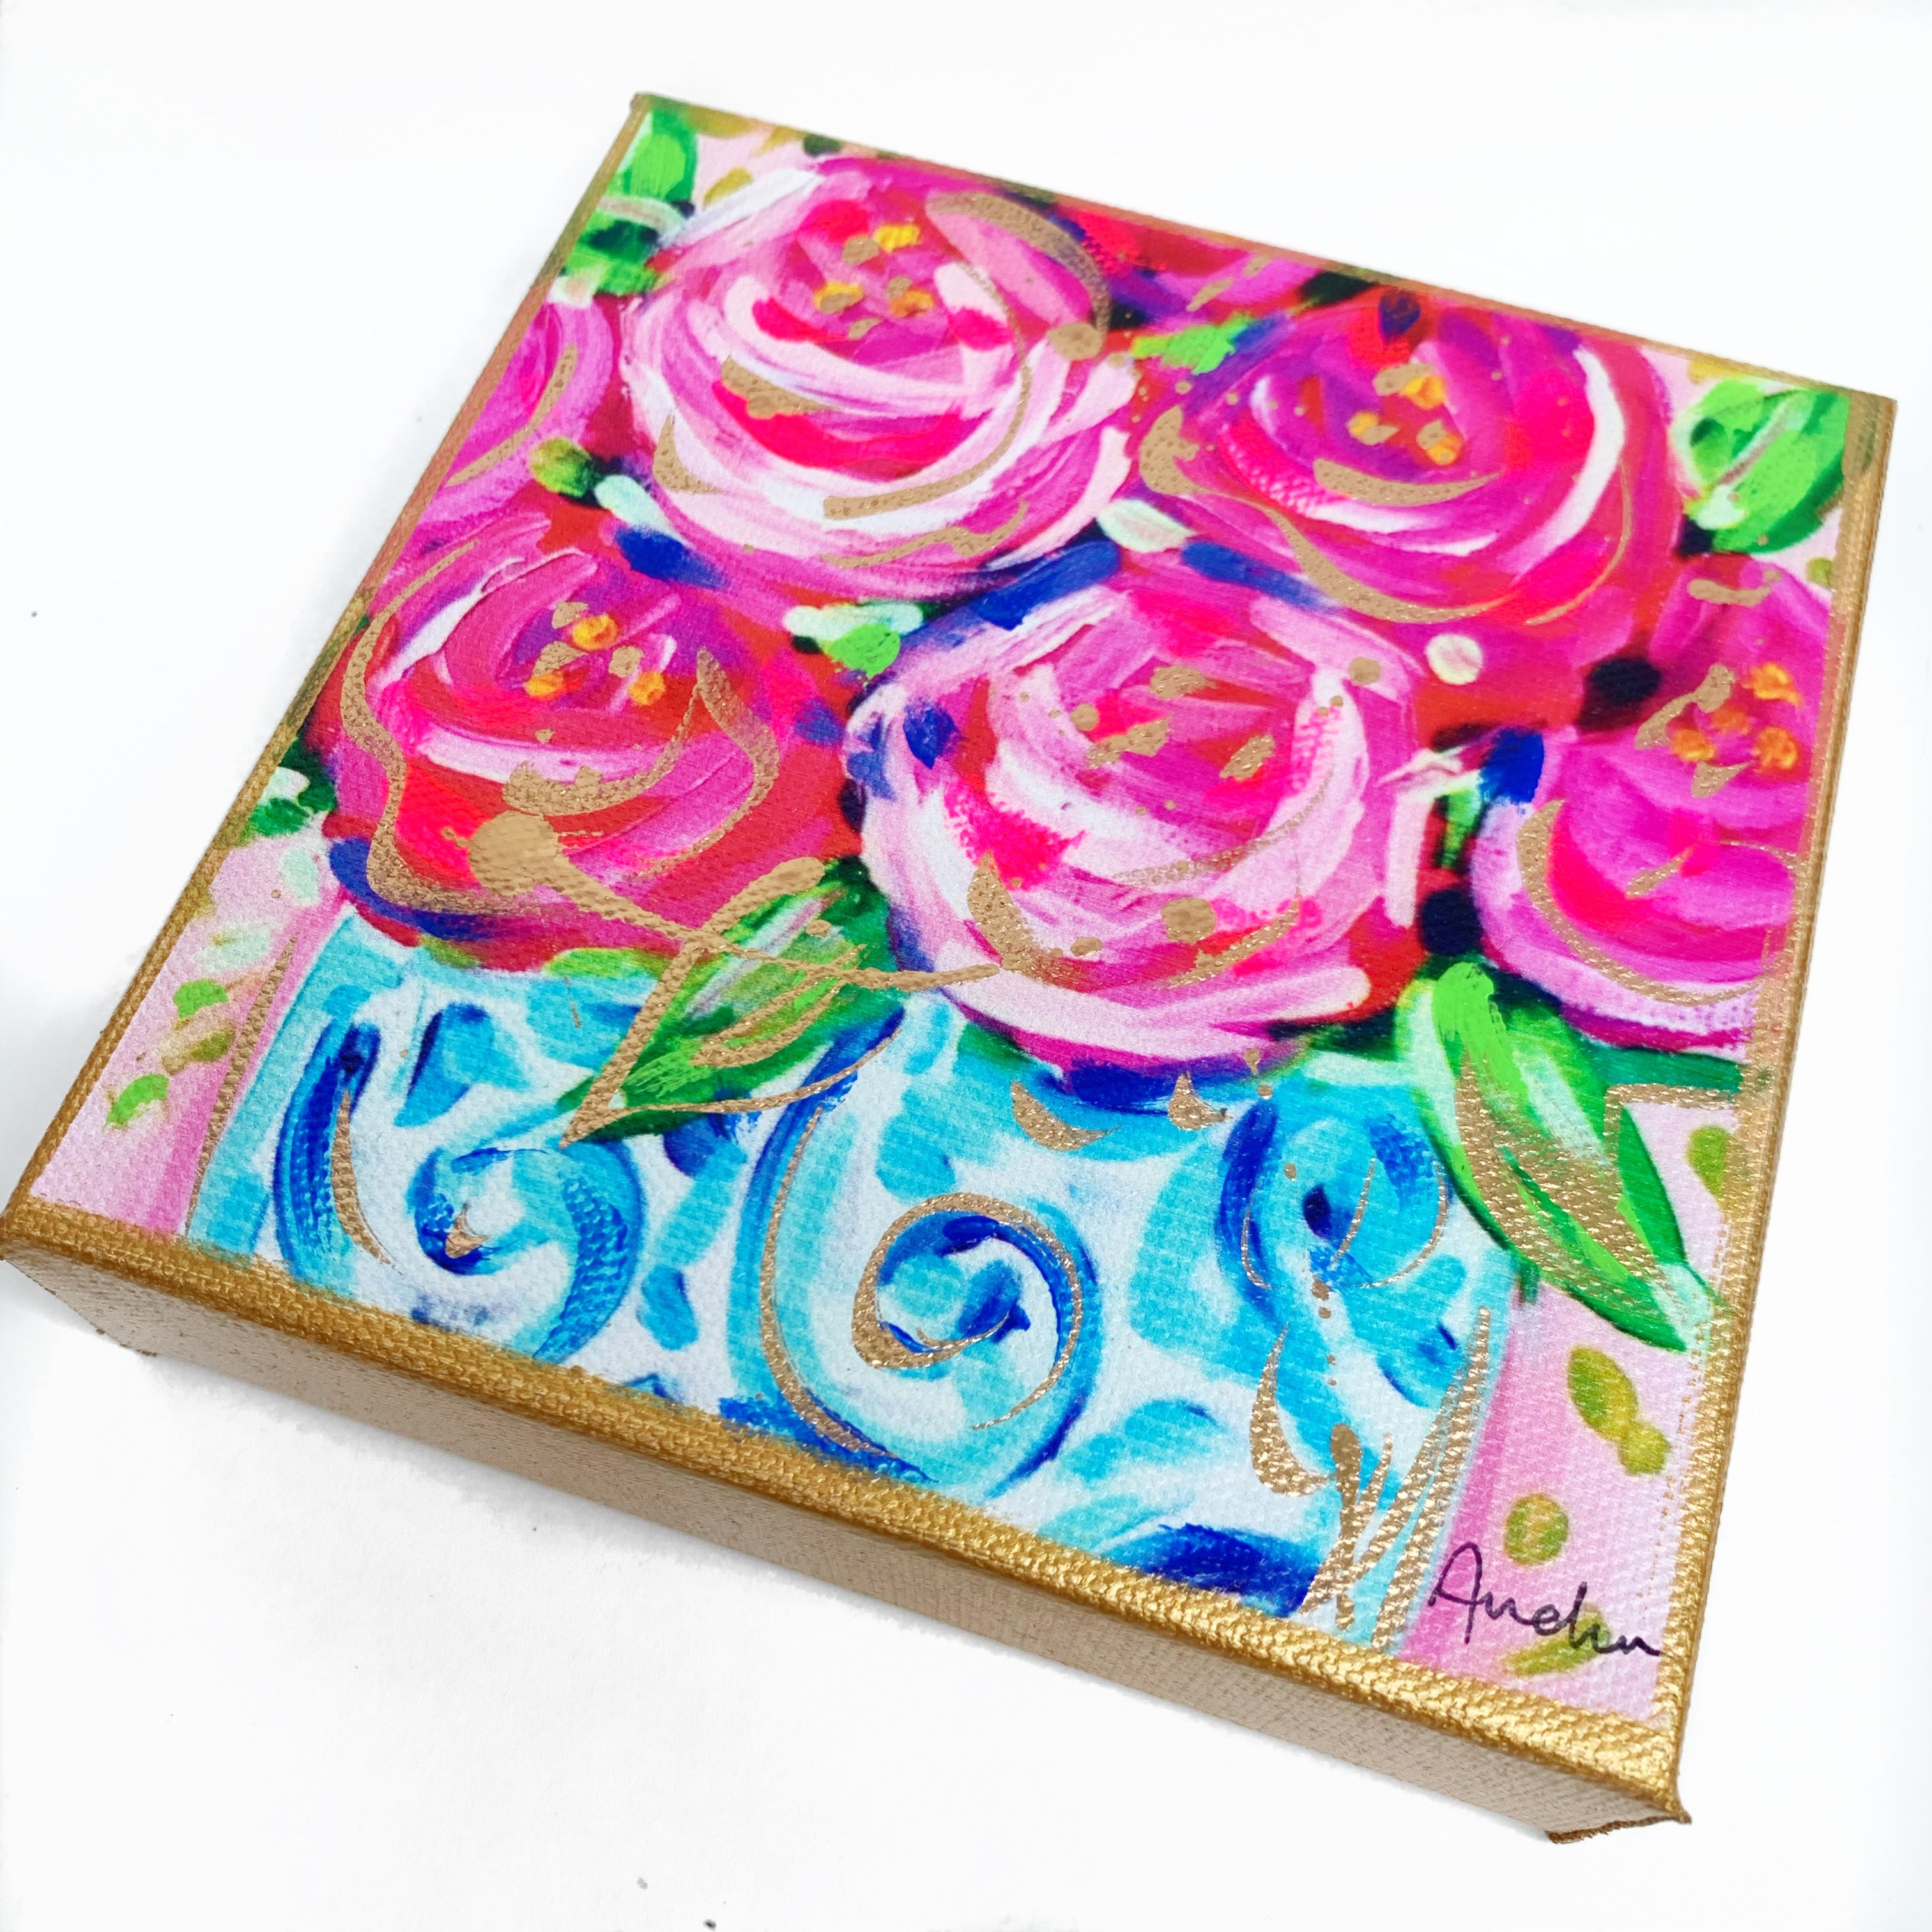 Roses Ginger Jar on 6"x6" Gallery Wrapped Canvas